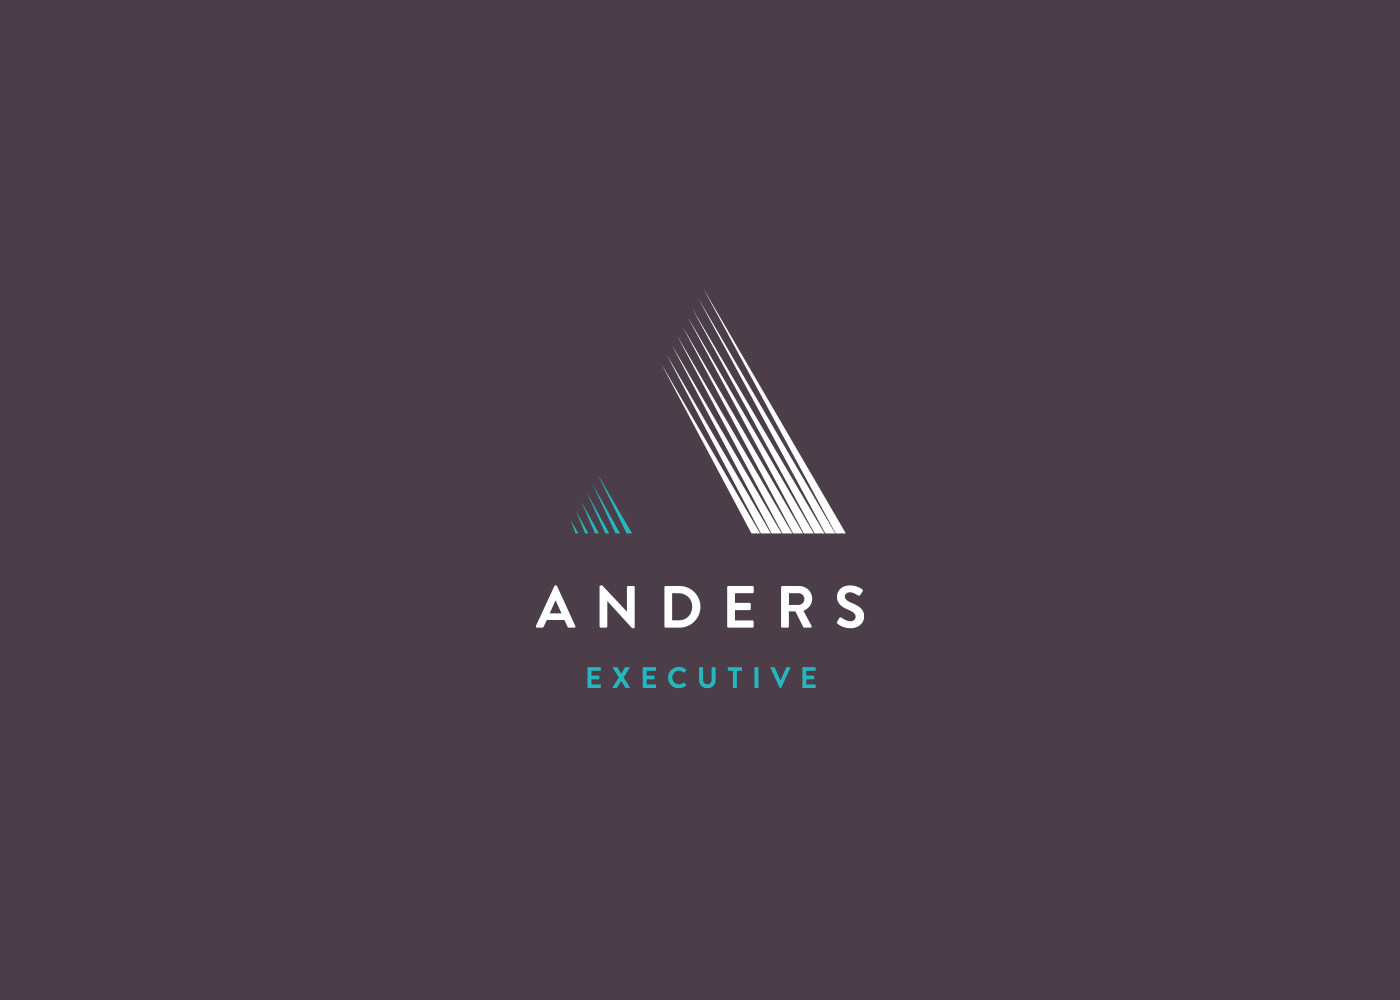 Anders Executive Anders Executive Branding Recruitment Branding recruitment recruitment logo recruitment website executive branding Logo and website